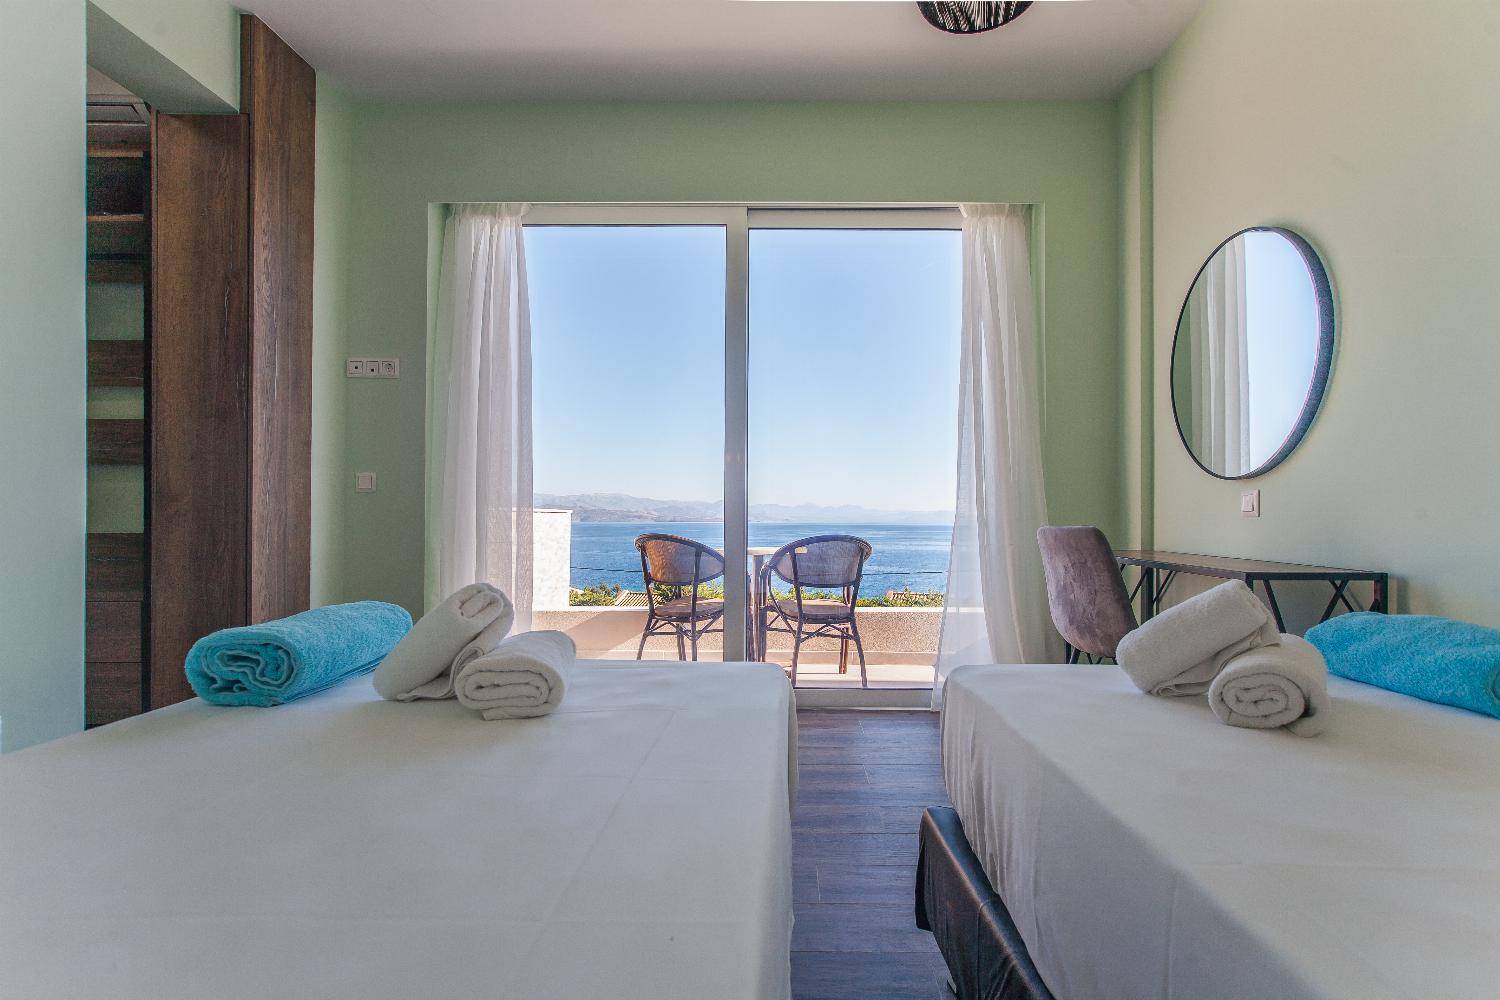 Twin bedroom with en suite bathroom, A/C, and balcony access with panoramic sea views